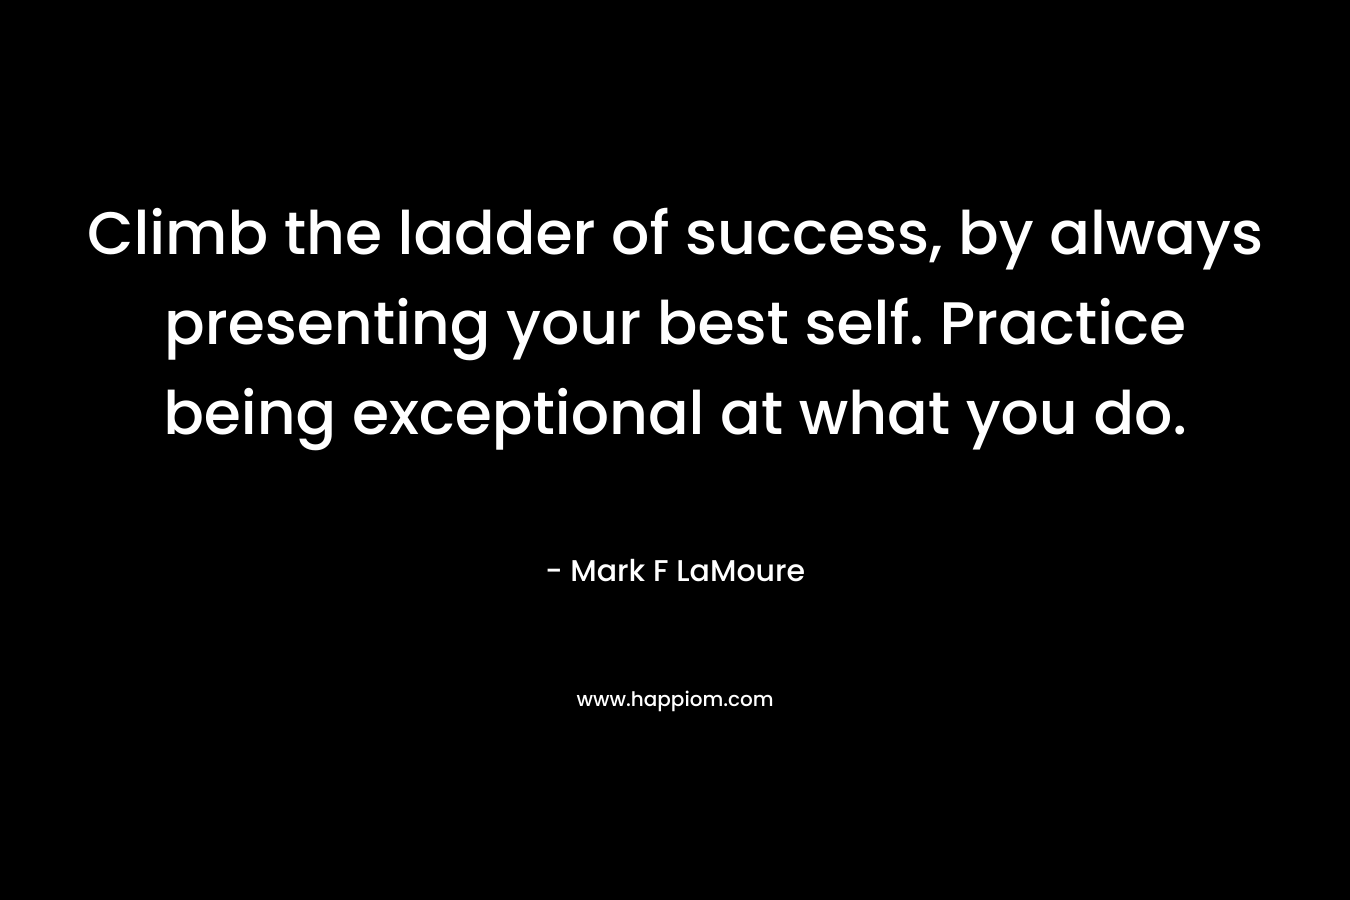 Climb the ladder of success, by always presenting your best self. Practice being exceptional at what you do.